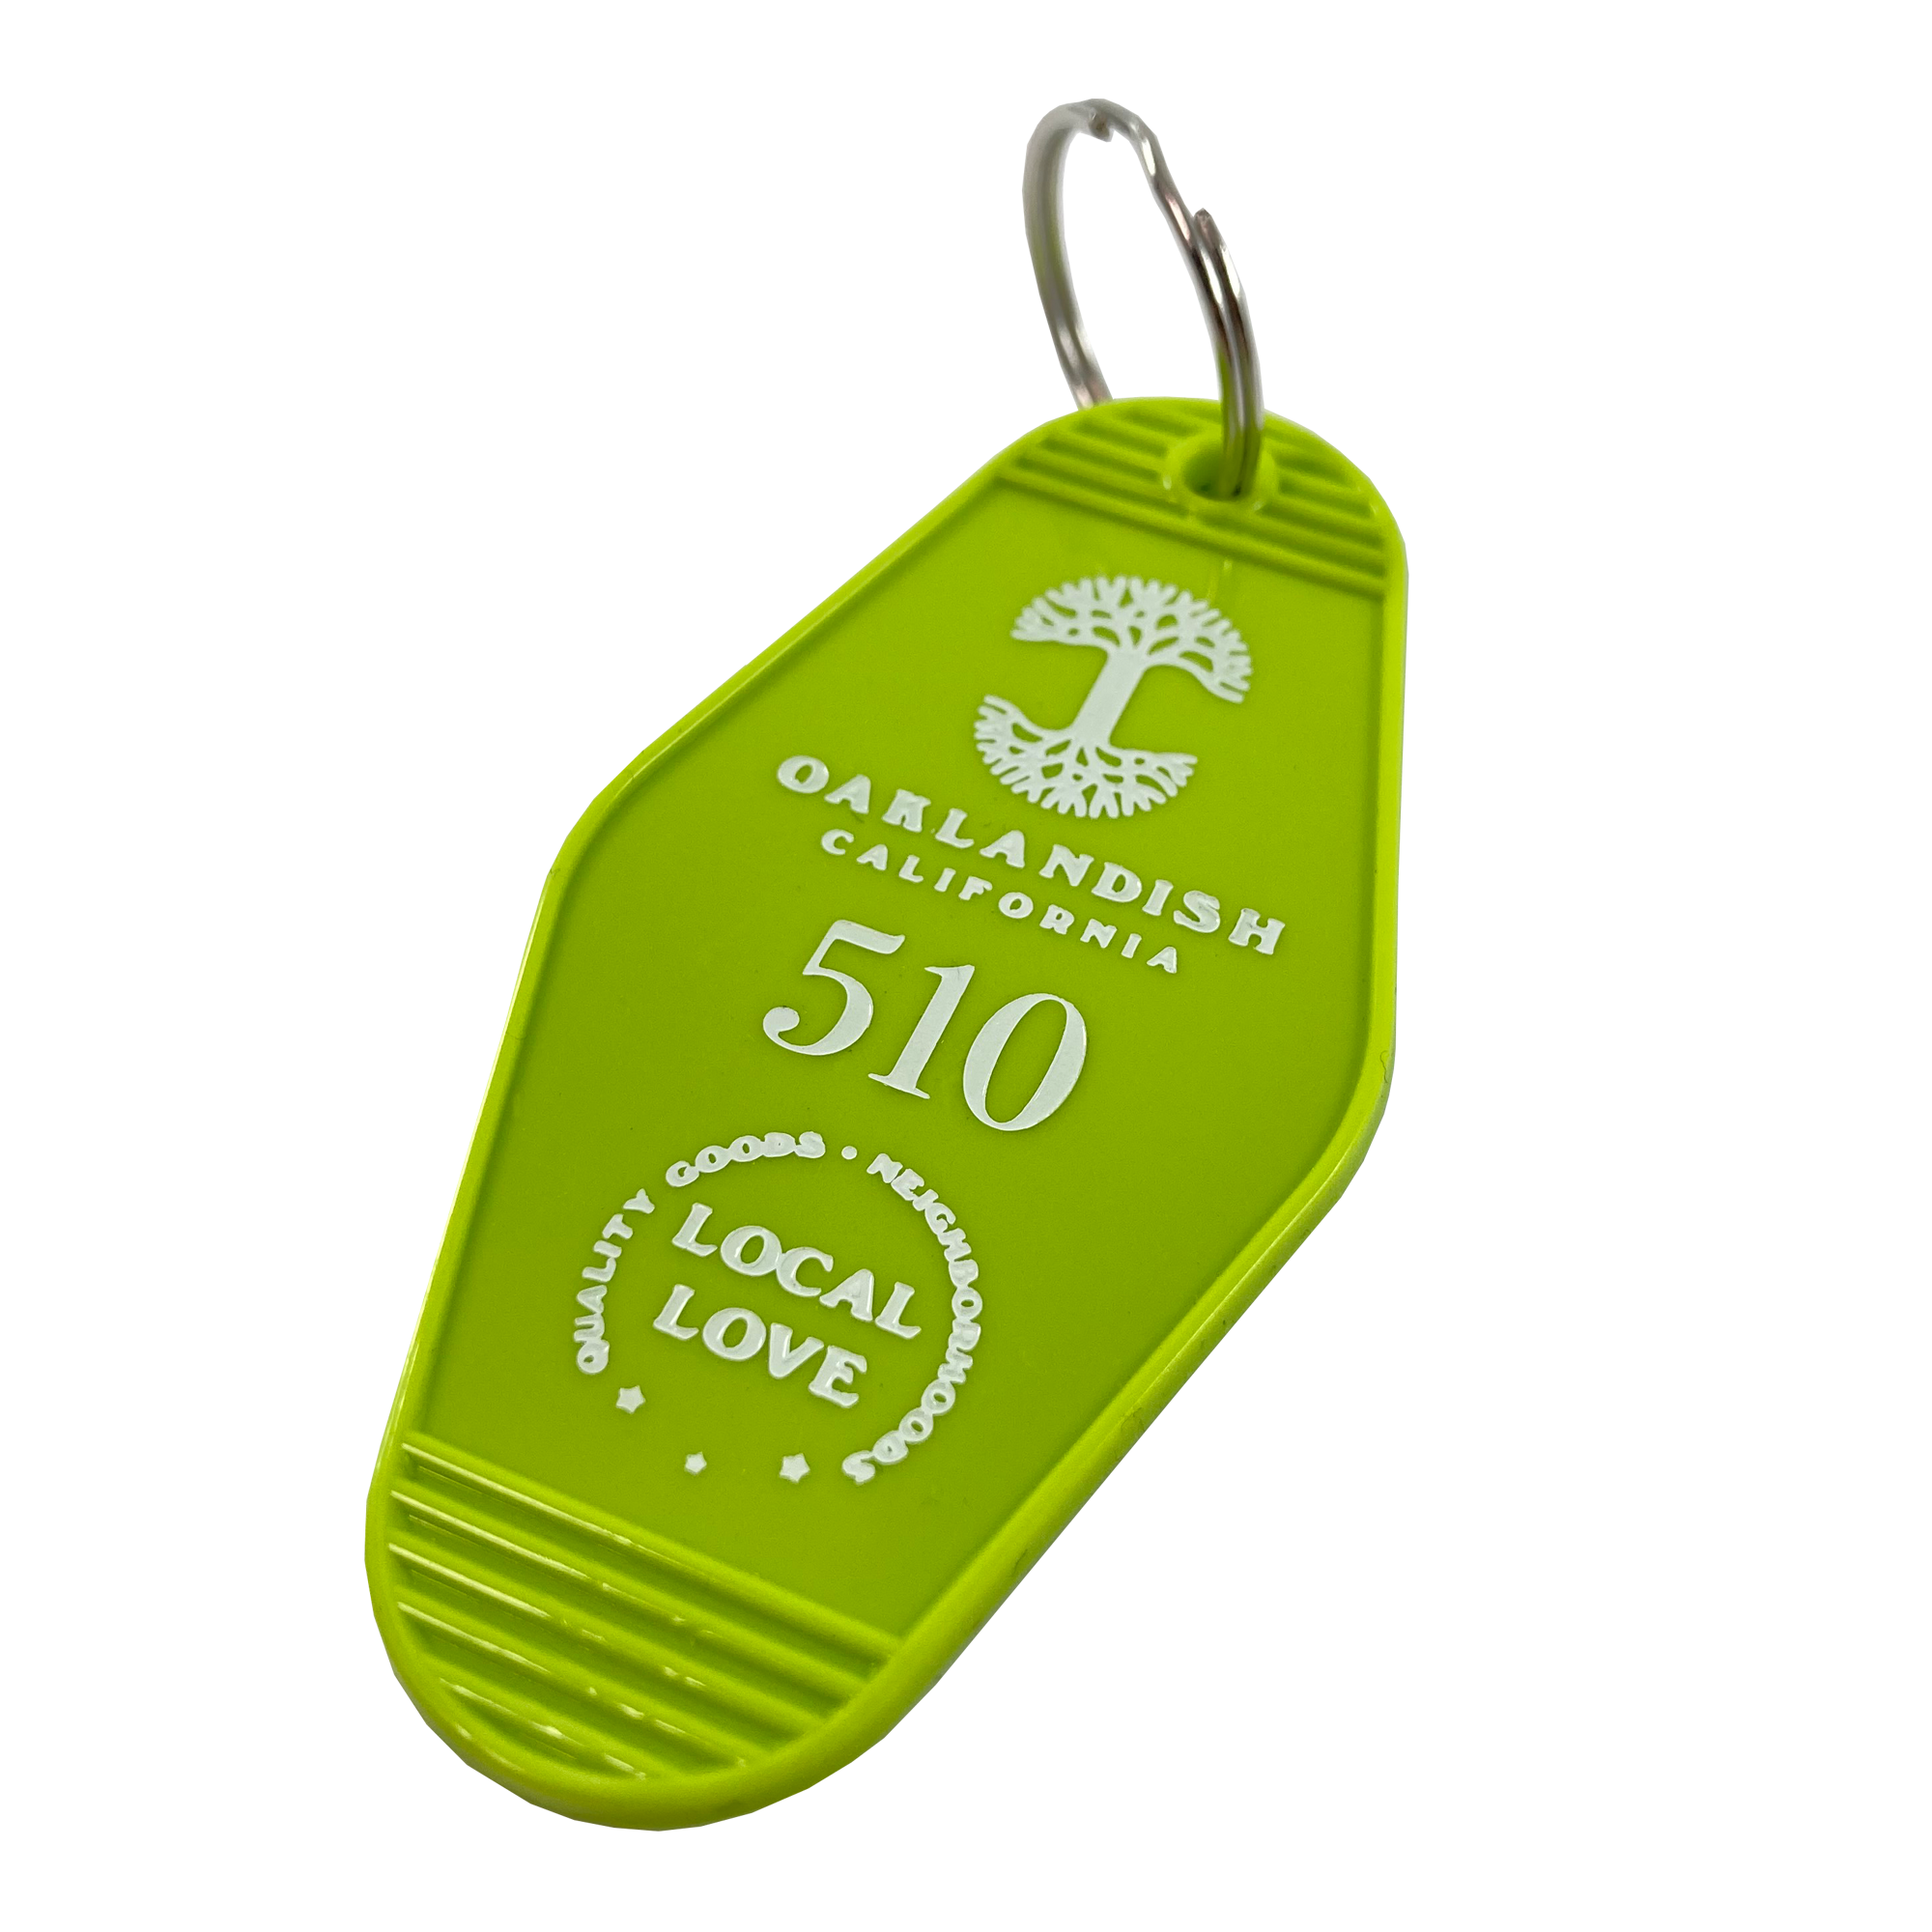 Detailed angle image of Lime green vintage motel-style keychain with gold Oaklandish Logo and wordmark and 510 local love logo.